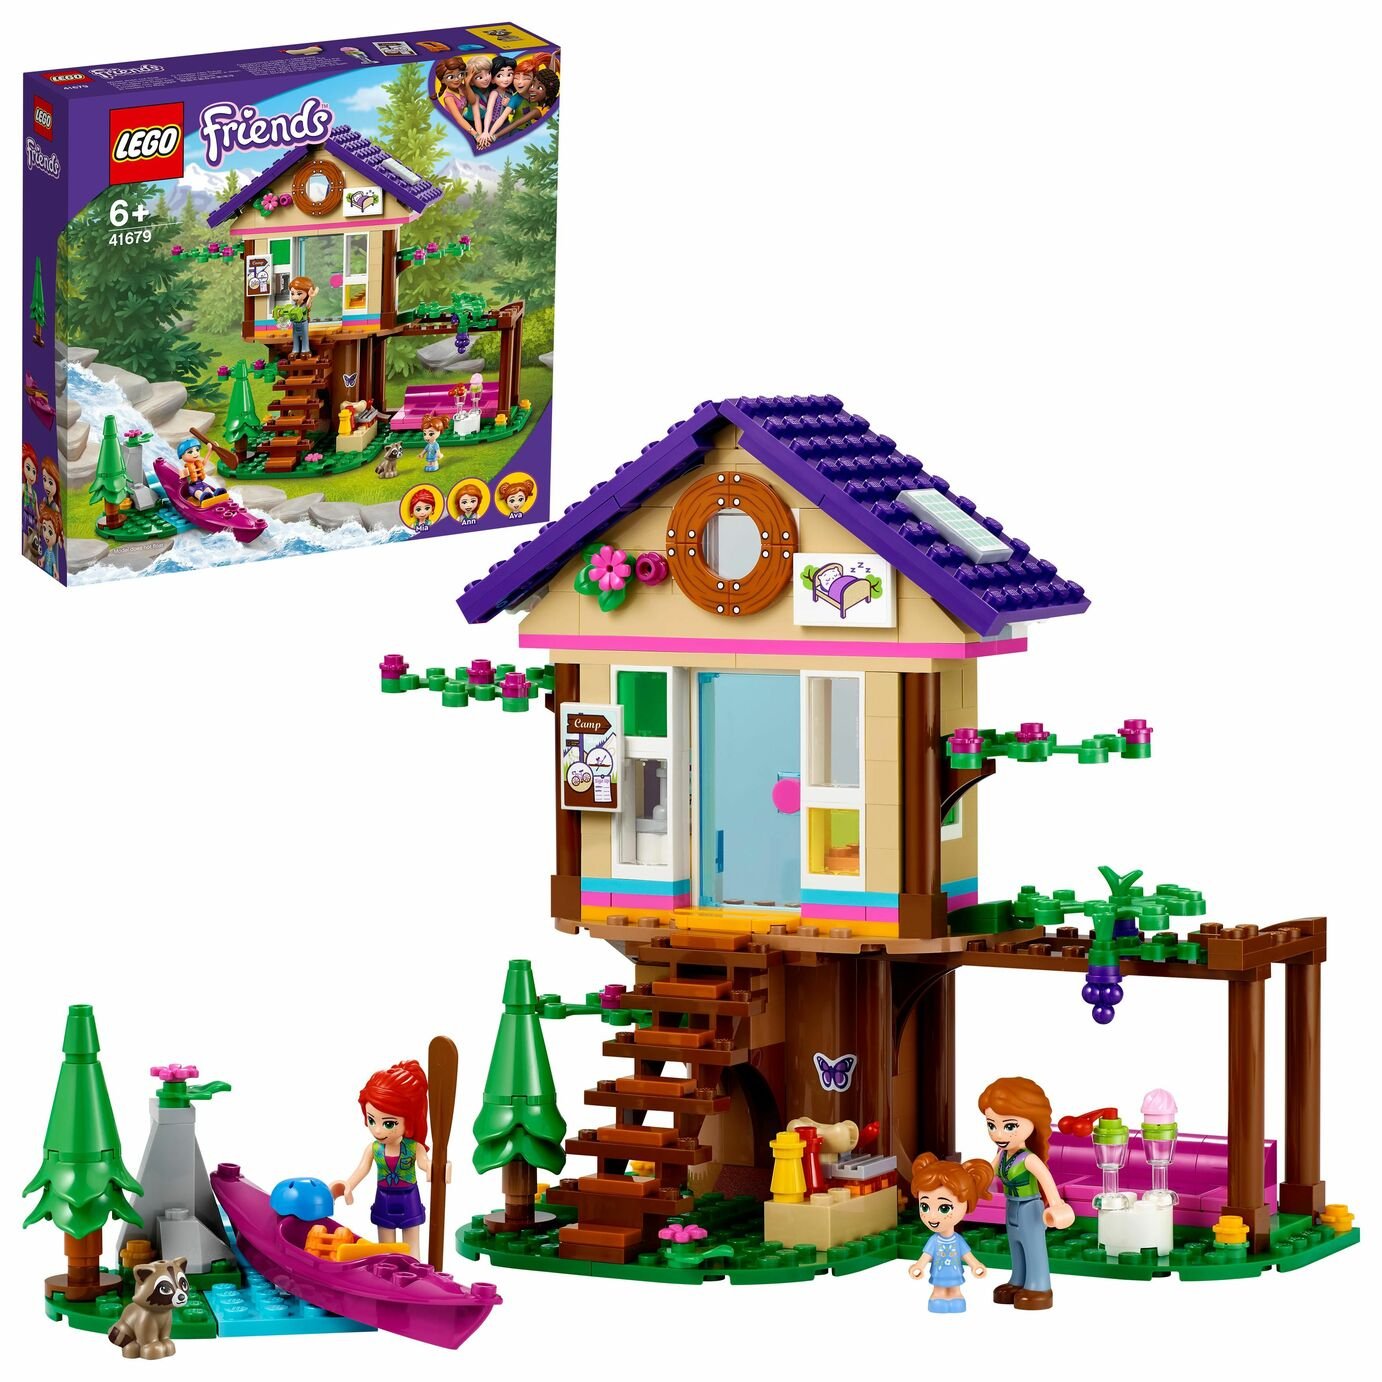 LEGO Friends Forest House Treehouse Toy Adventure Set 41679